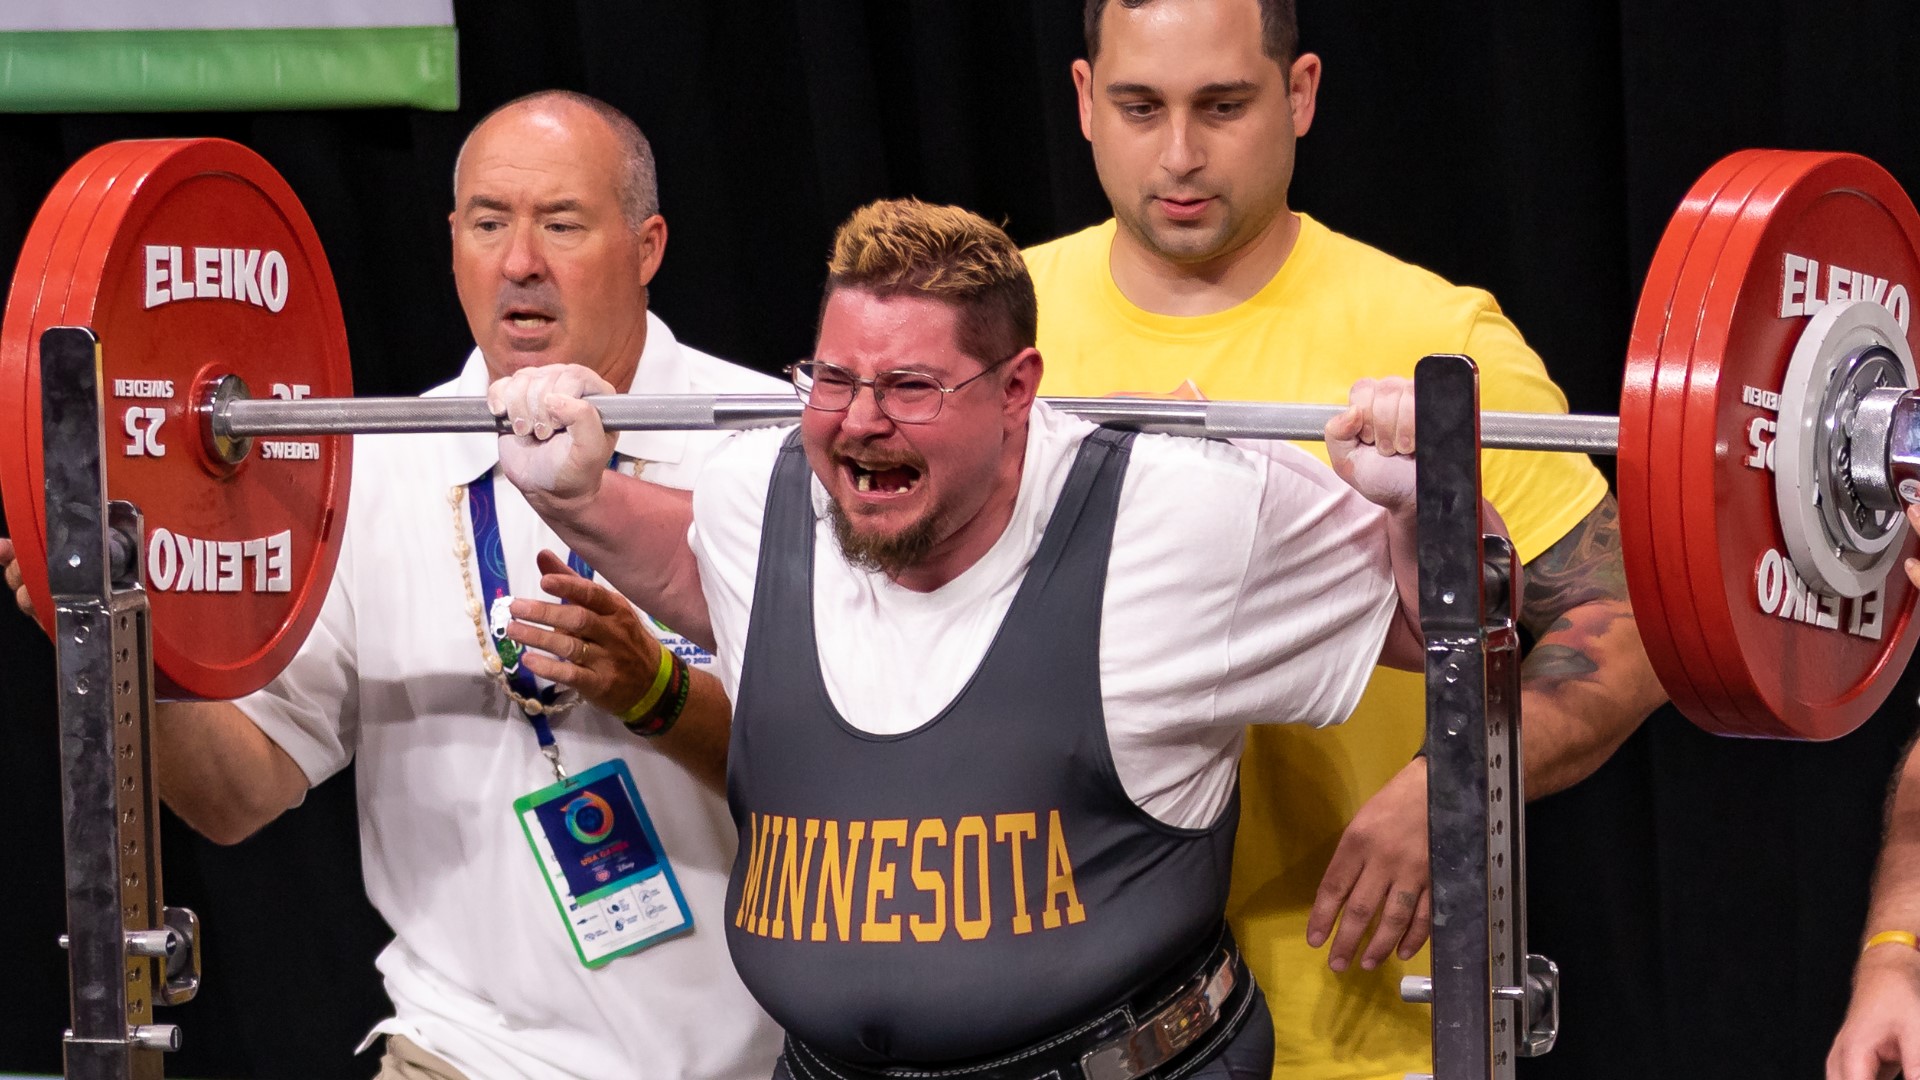 Daniel Boyd overcomes the odds to capture gold in the powerlifting competition at the national Special Olympics in Orlando.